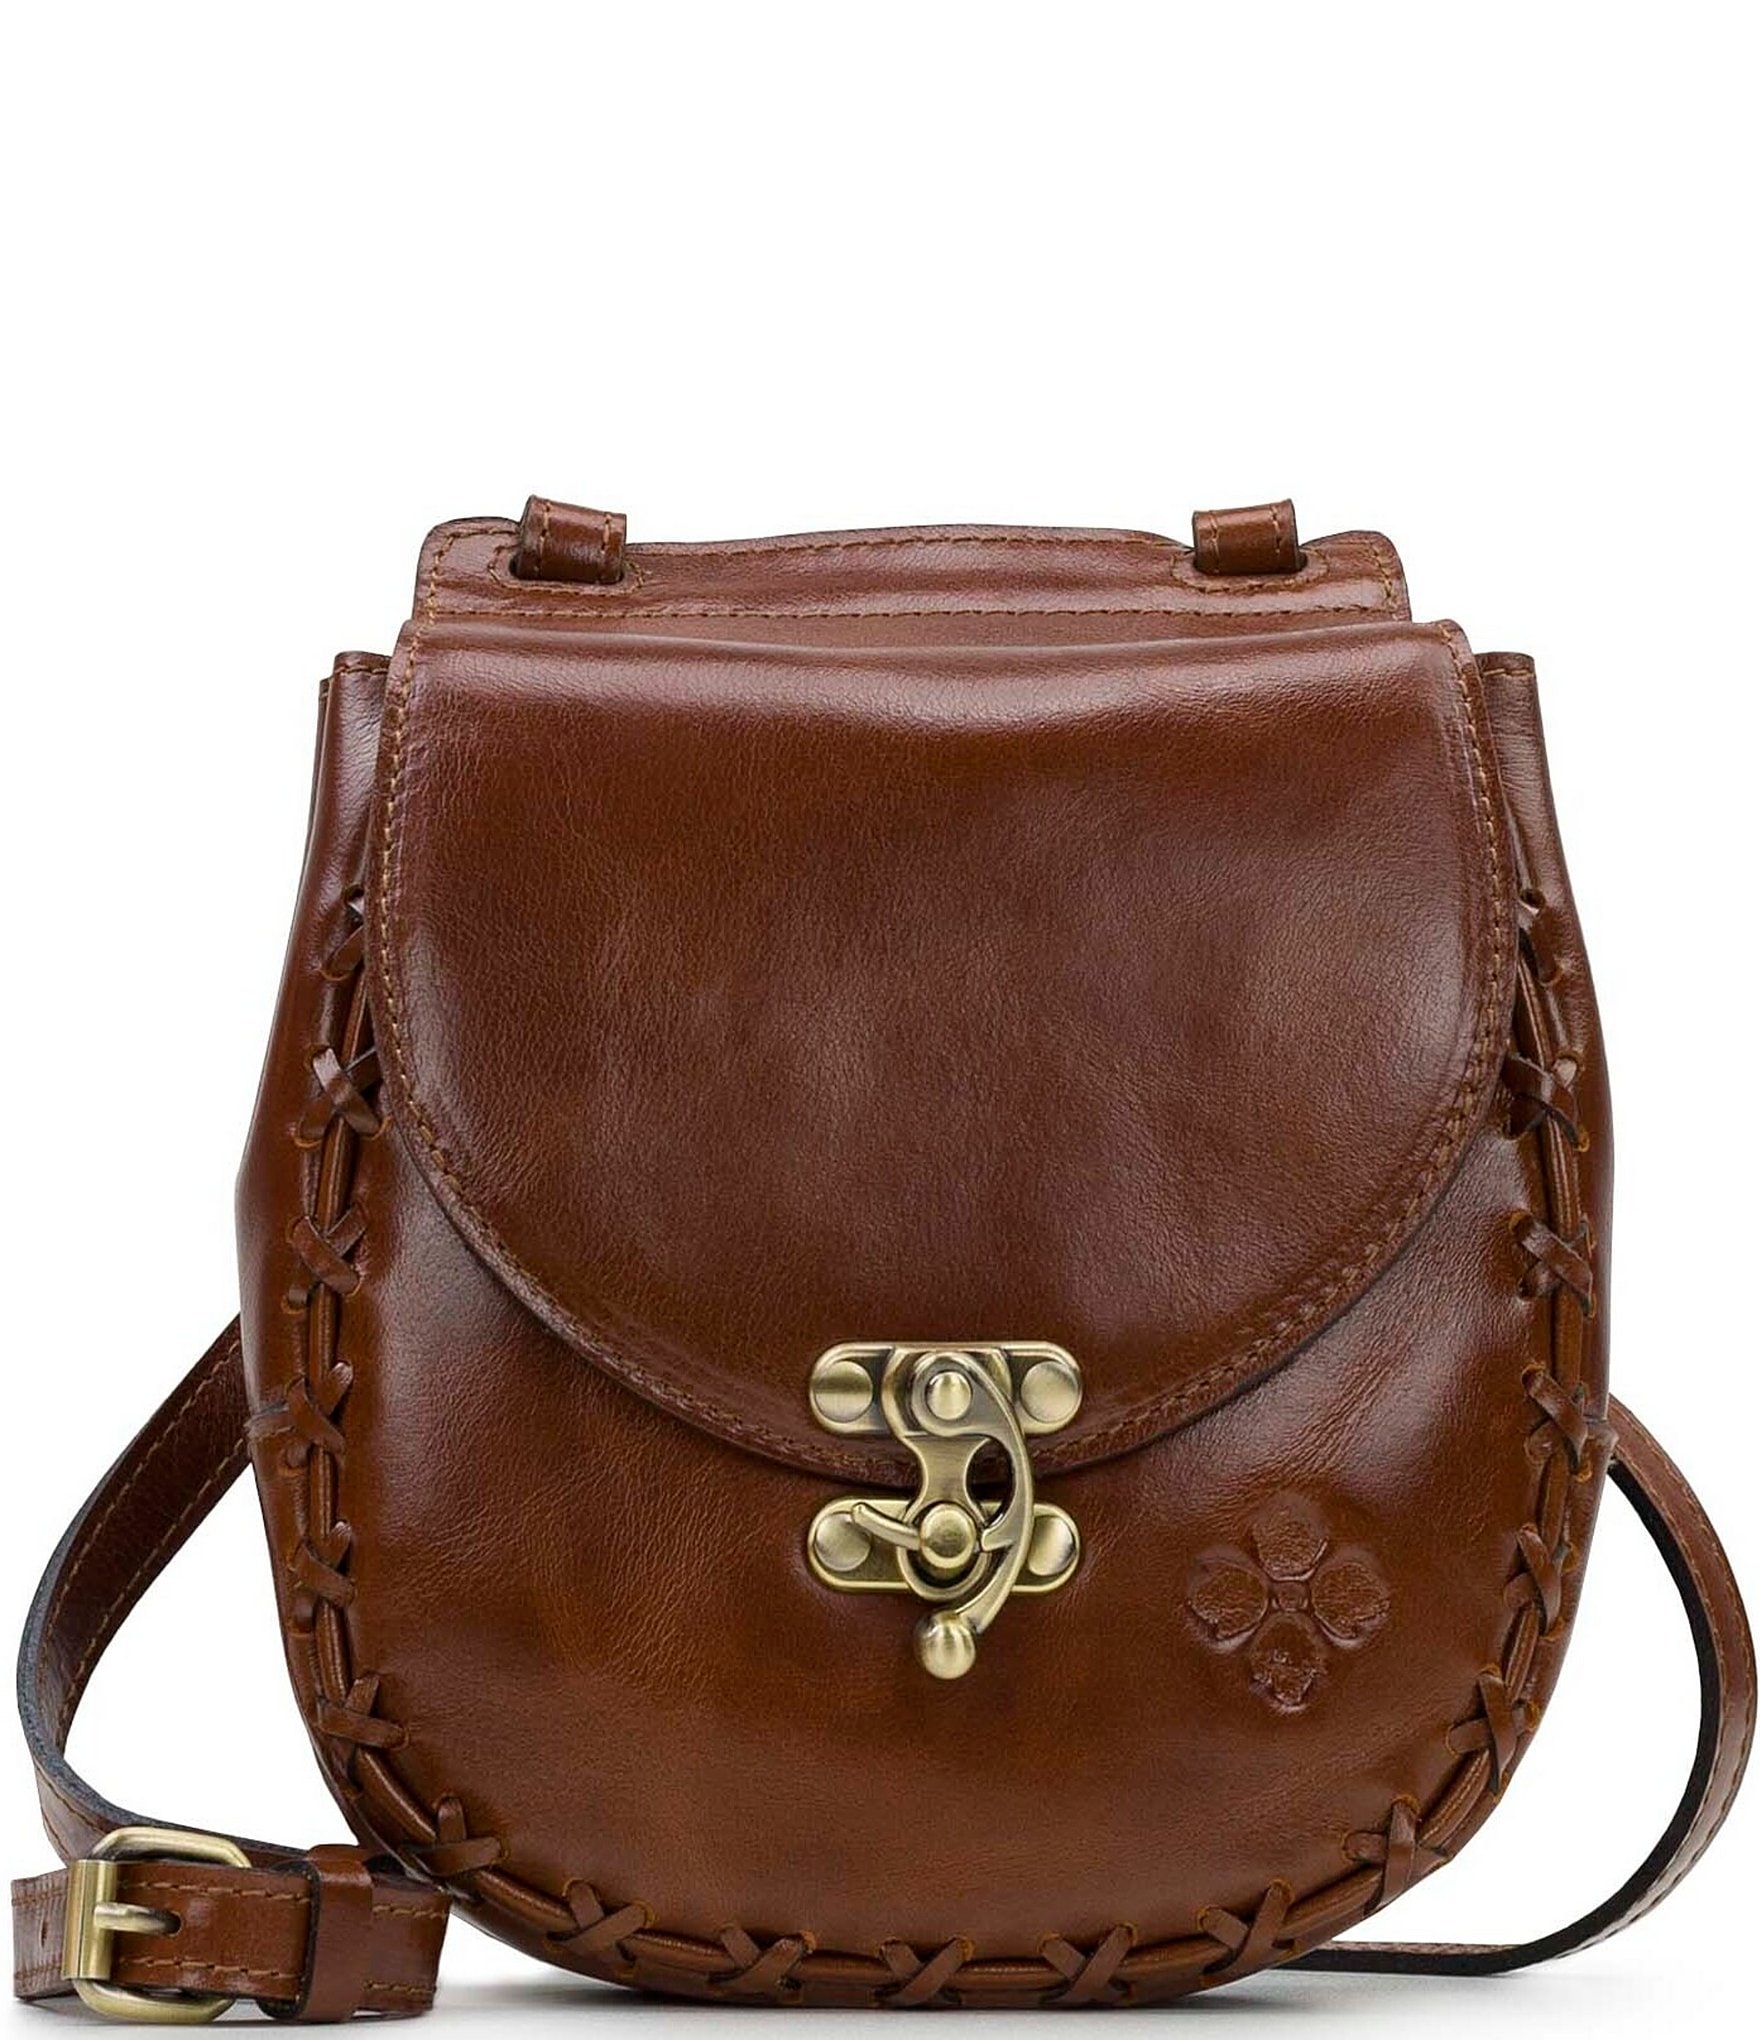 Buy FLH Bohemian Embroidered Faux Leather Crossbody, Saddle Bag w/ Fringe  Aztec Tassel at Amazon.in